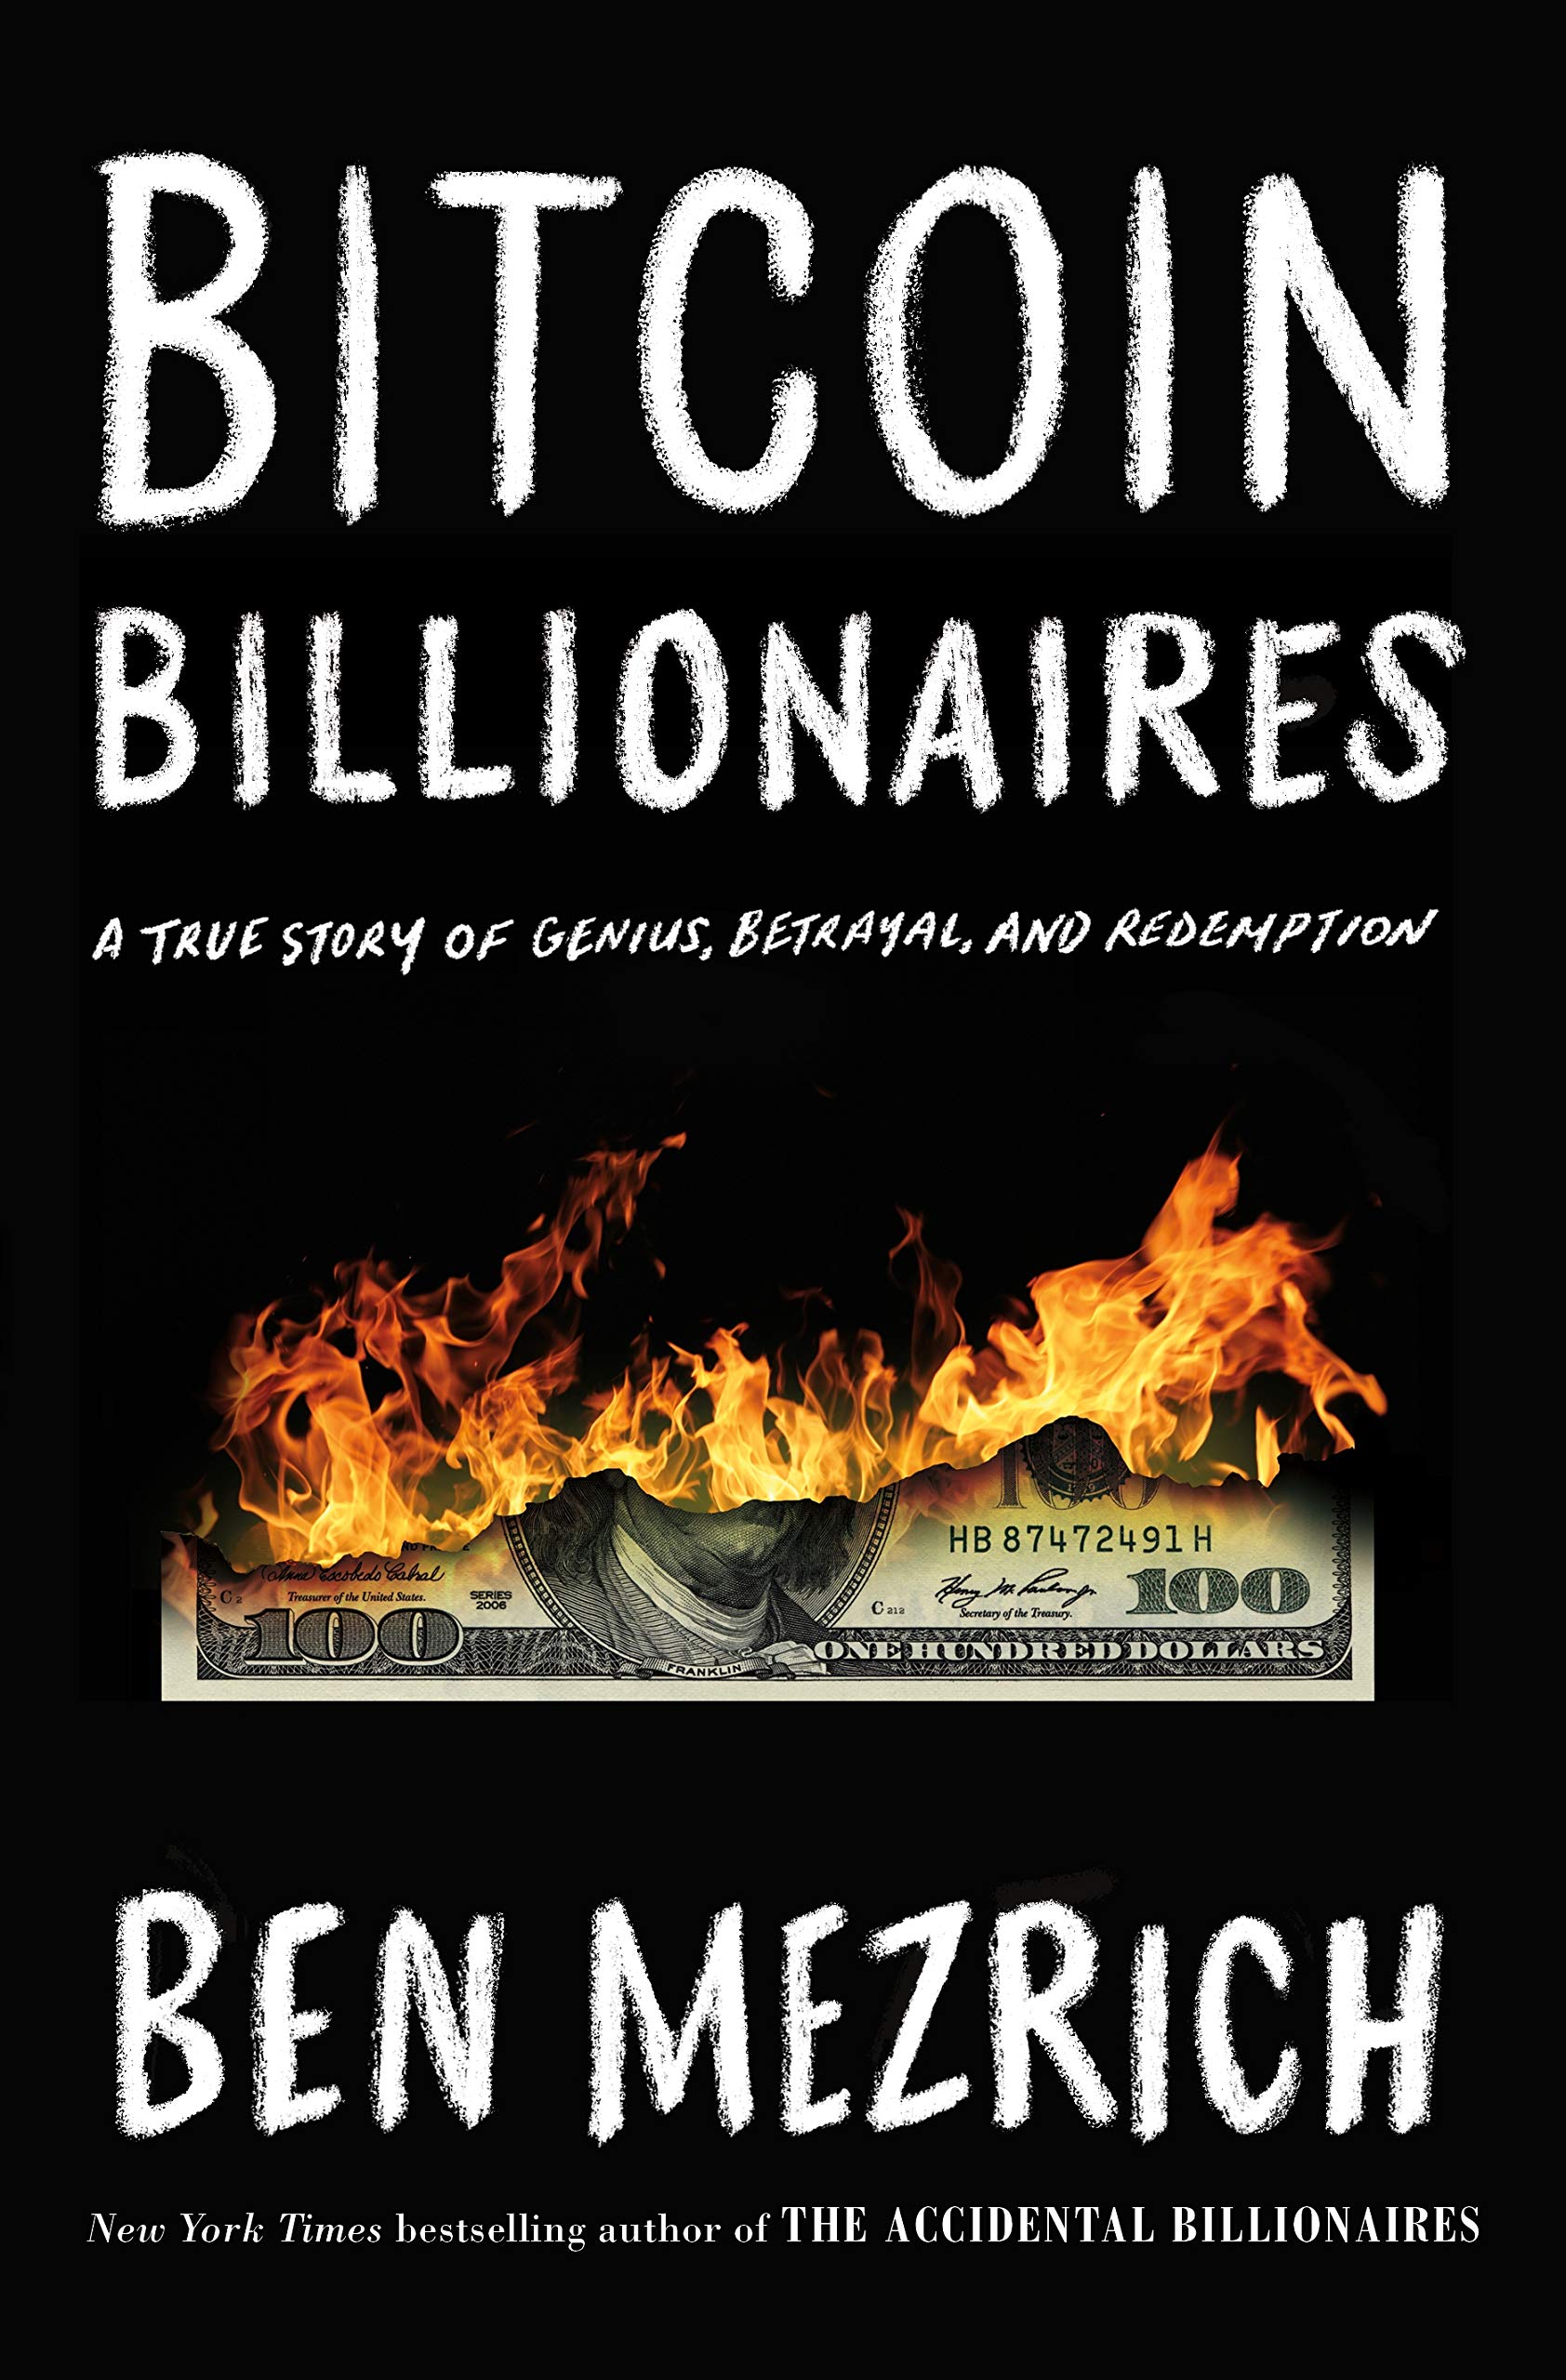 Bitcoin Billionaires. A True Story of Genius, Betrayal and Redemption